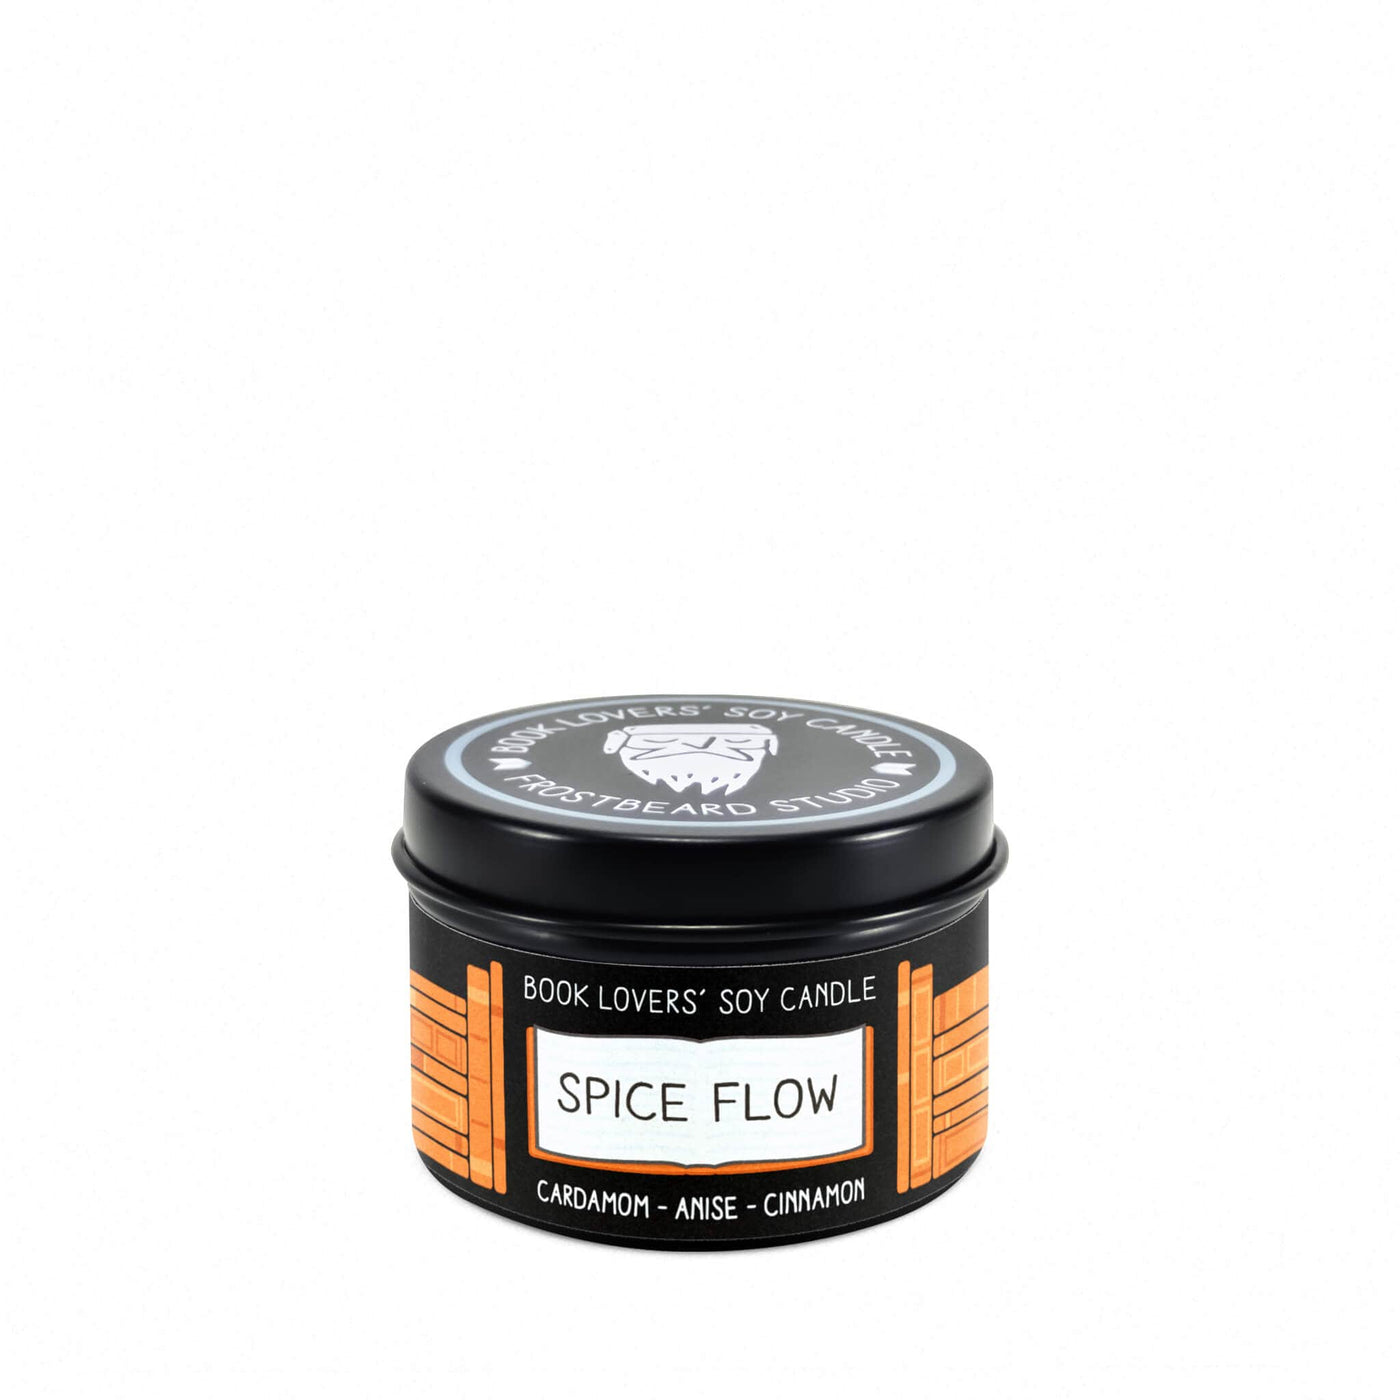 Spice Flow - 2 oz Tin - Book Lovers' Soy Candle - Frostbeard Studio